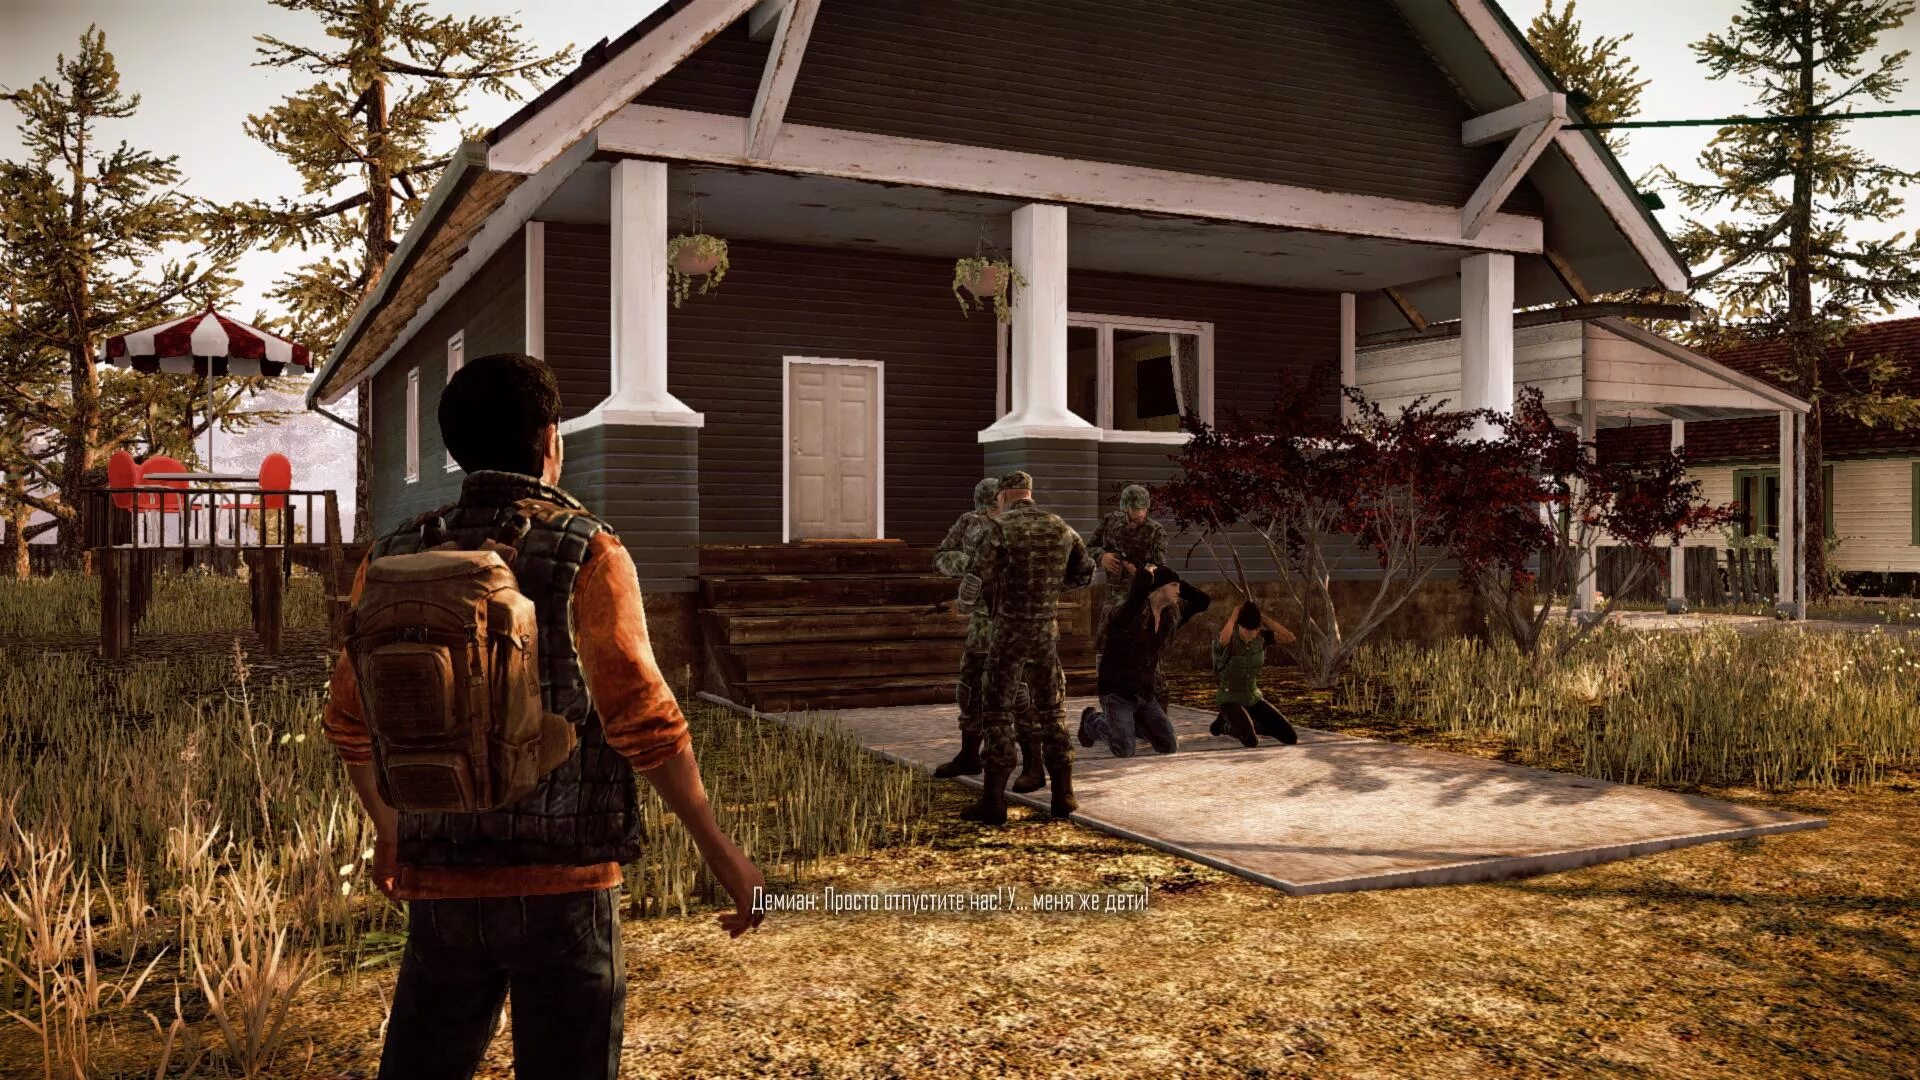 State of Decay. State of Decay 1. Игра State of Decay. Игра State of Decay 2. Игры с сюжетом кооператив